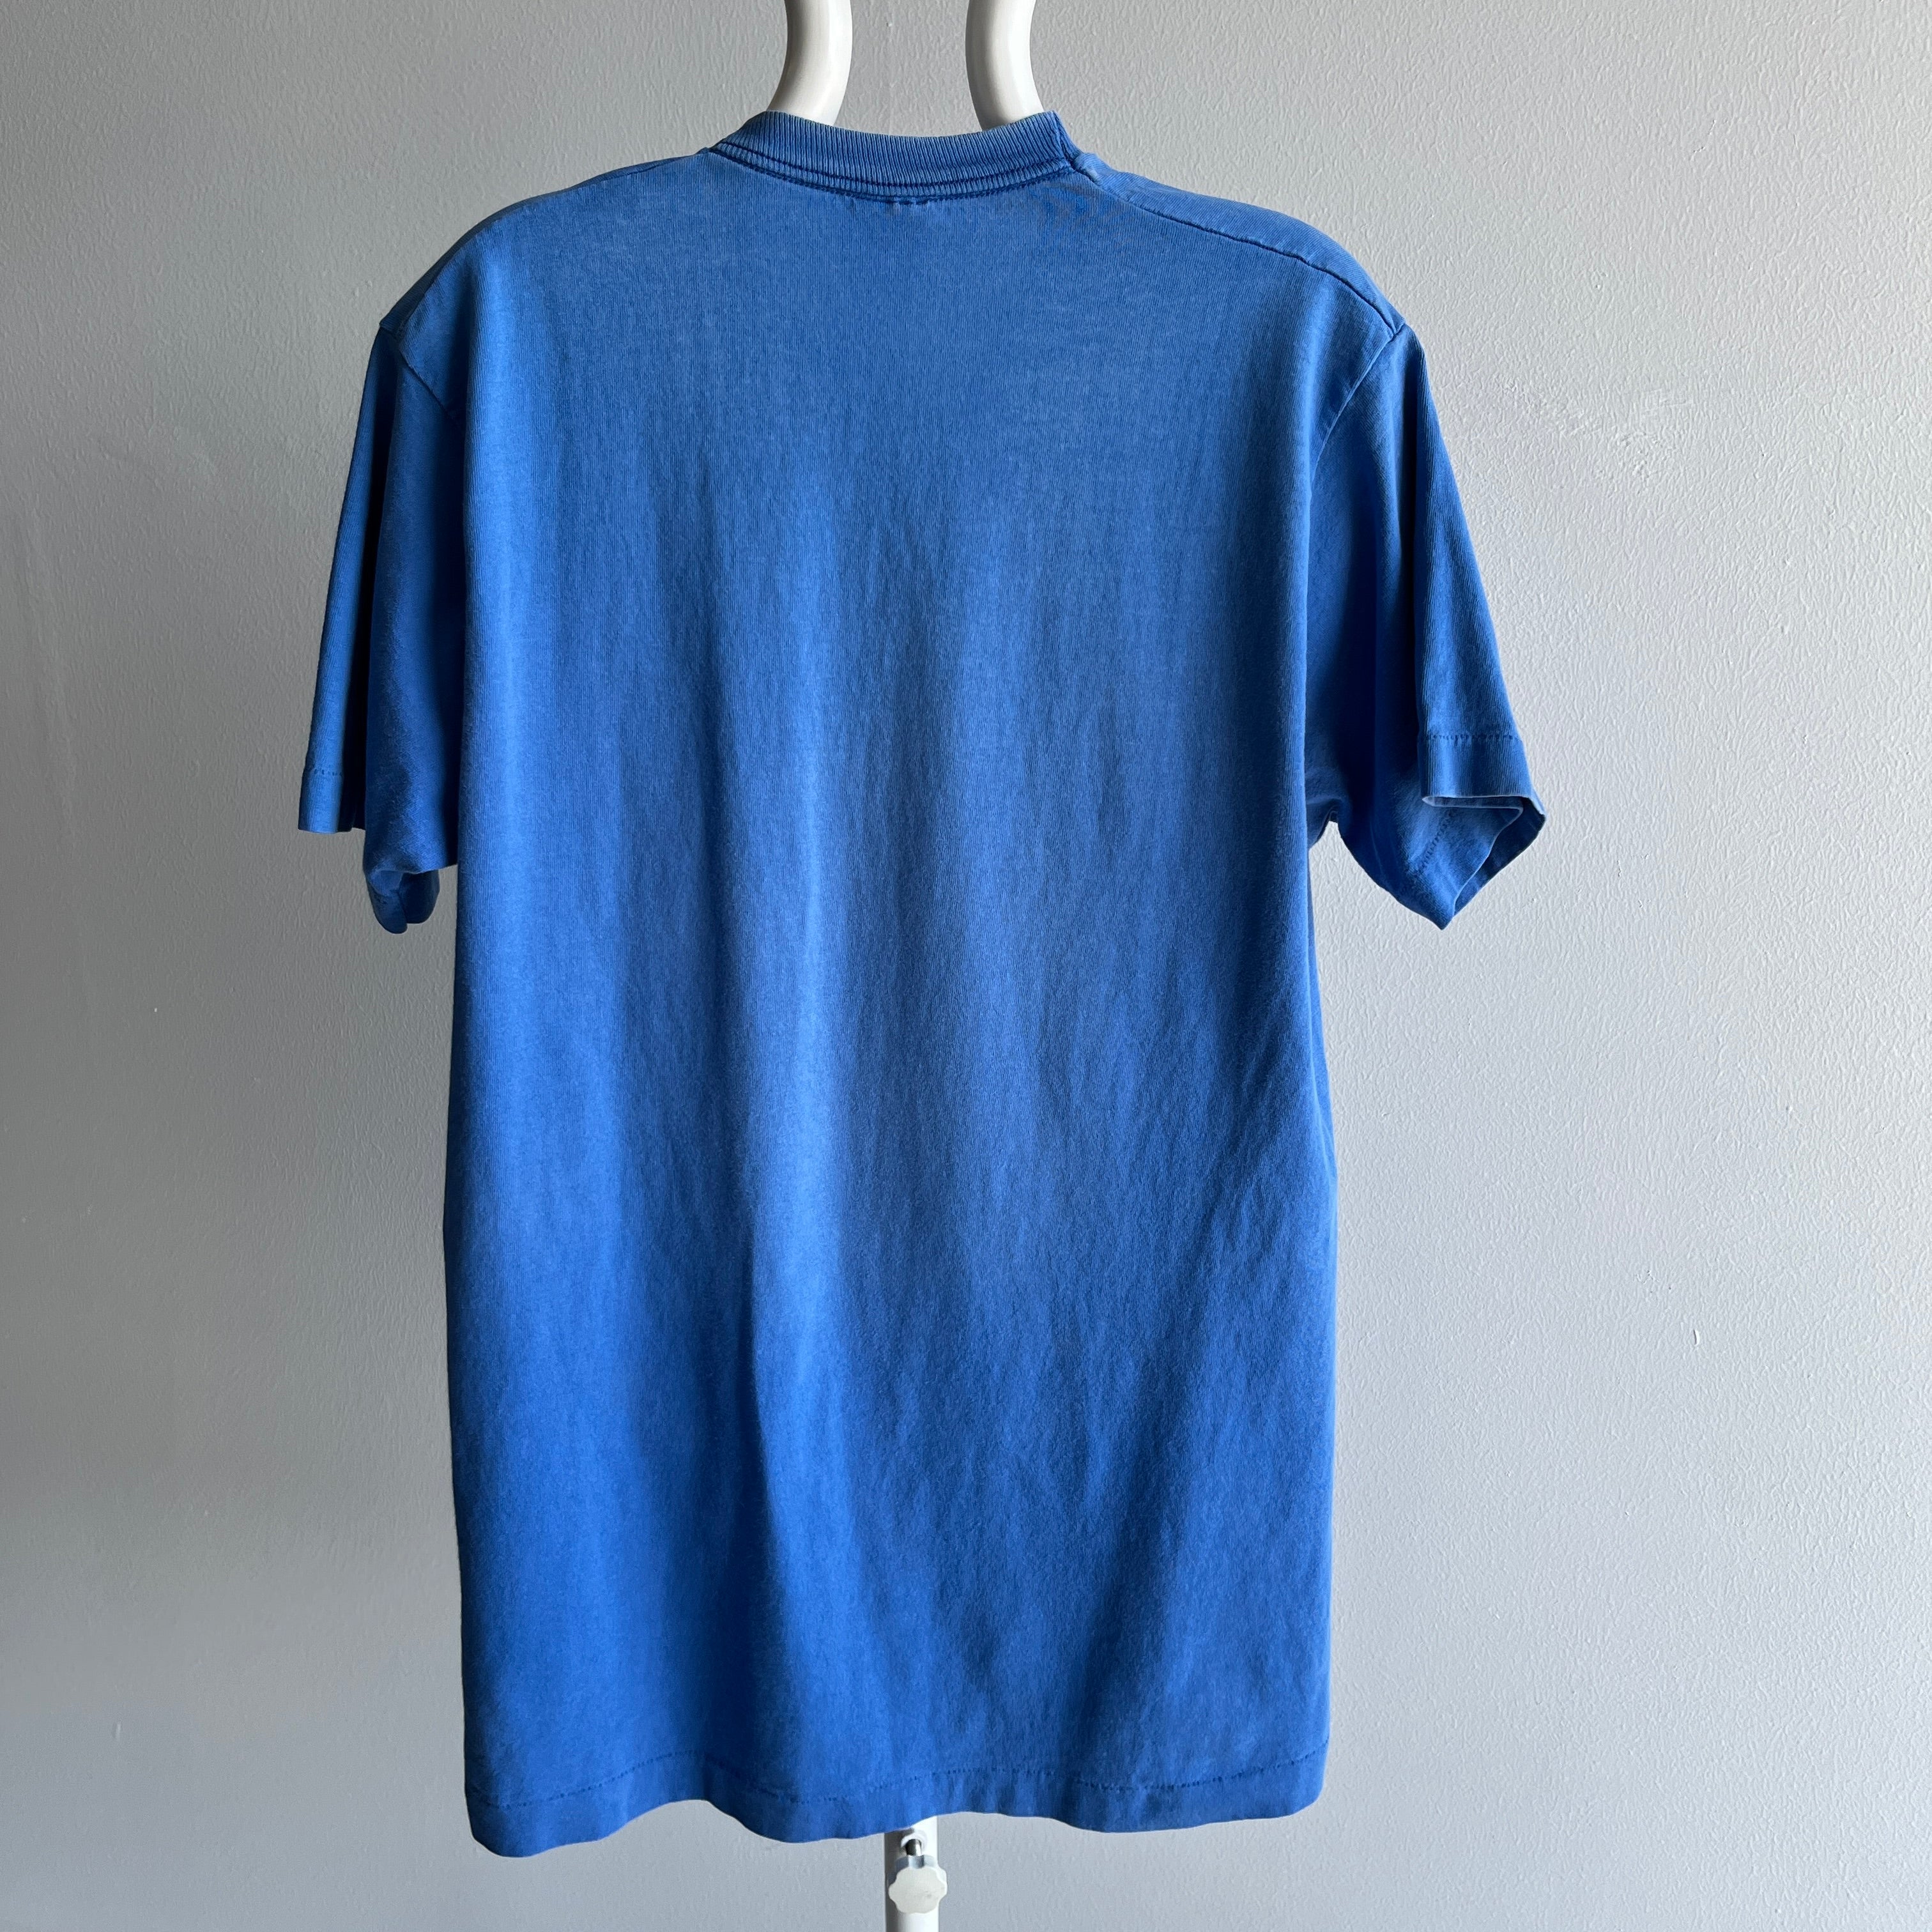 1980s Perfectly Worn Sky Blue Cotton Pocket T-Shirt by BVD